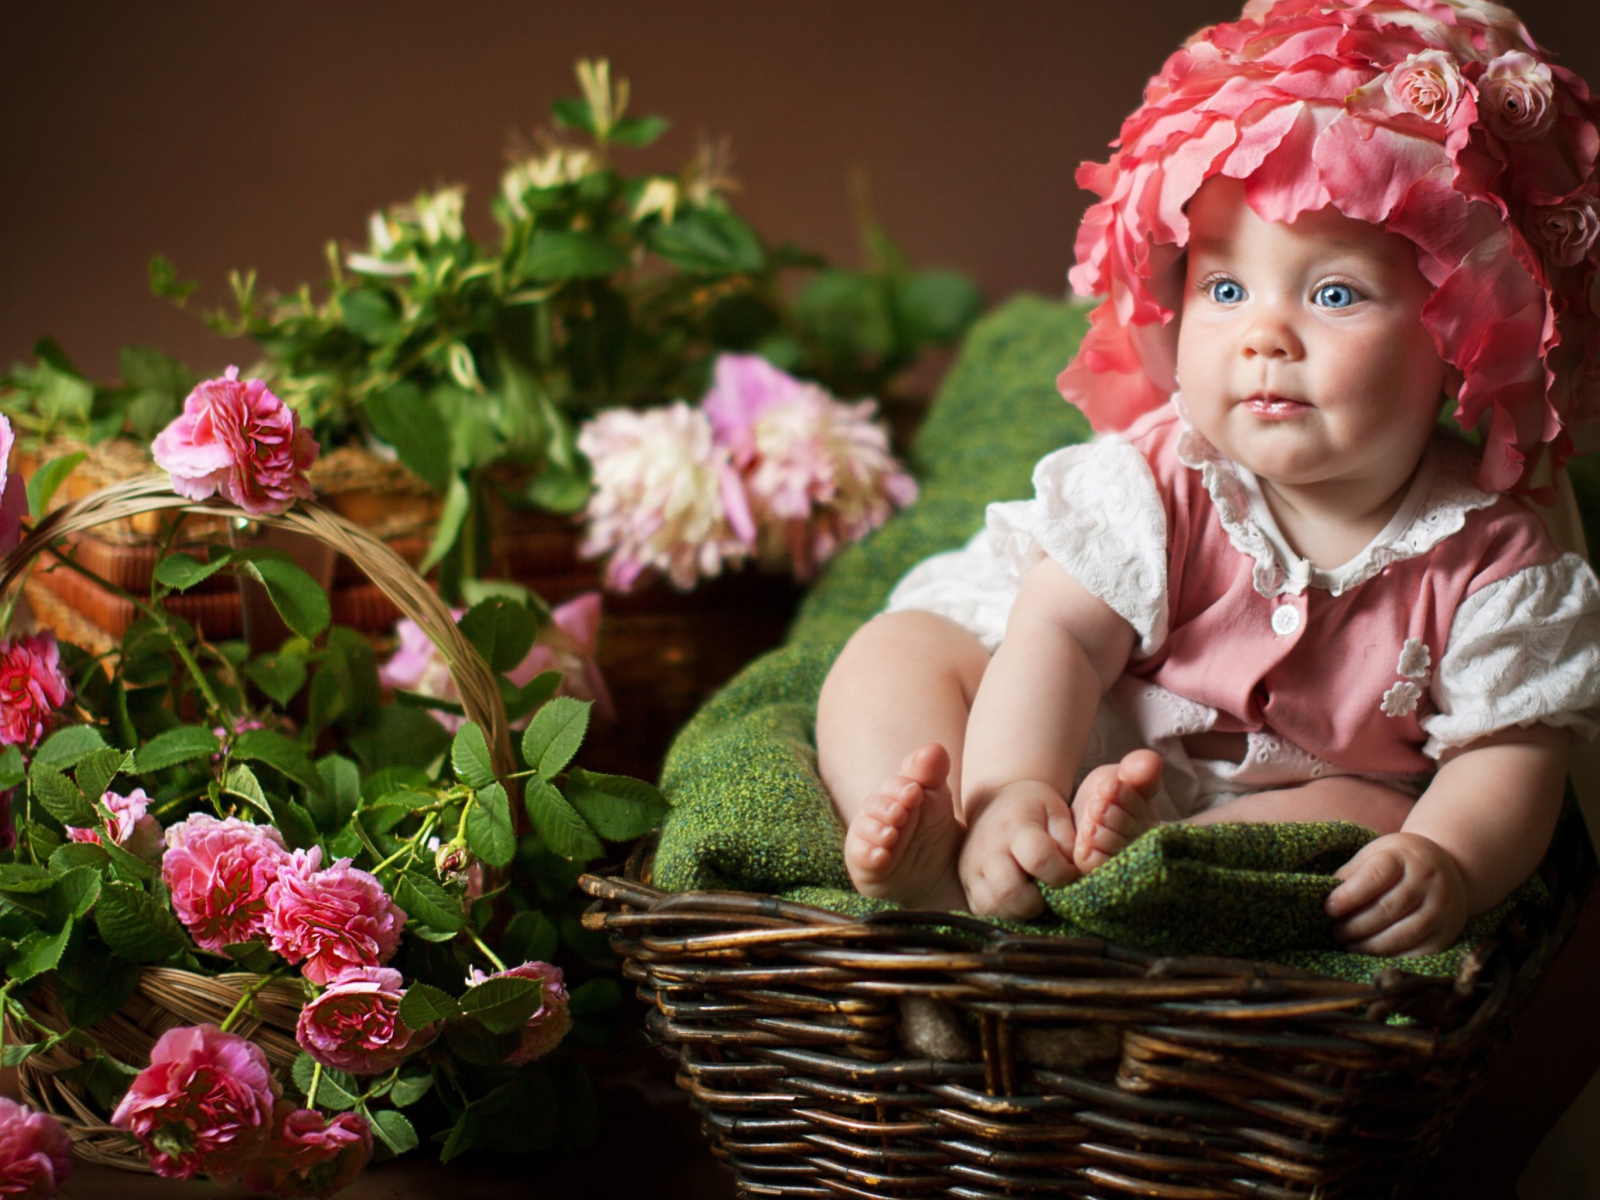 Das Cute Baby With Blue Eyes And Roses Wallpaper 1600x1200